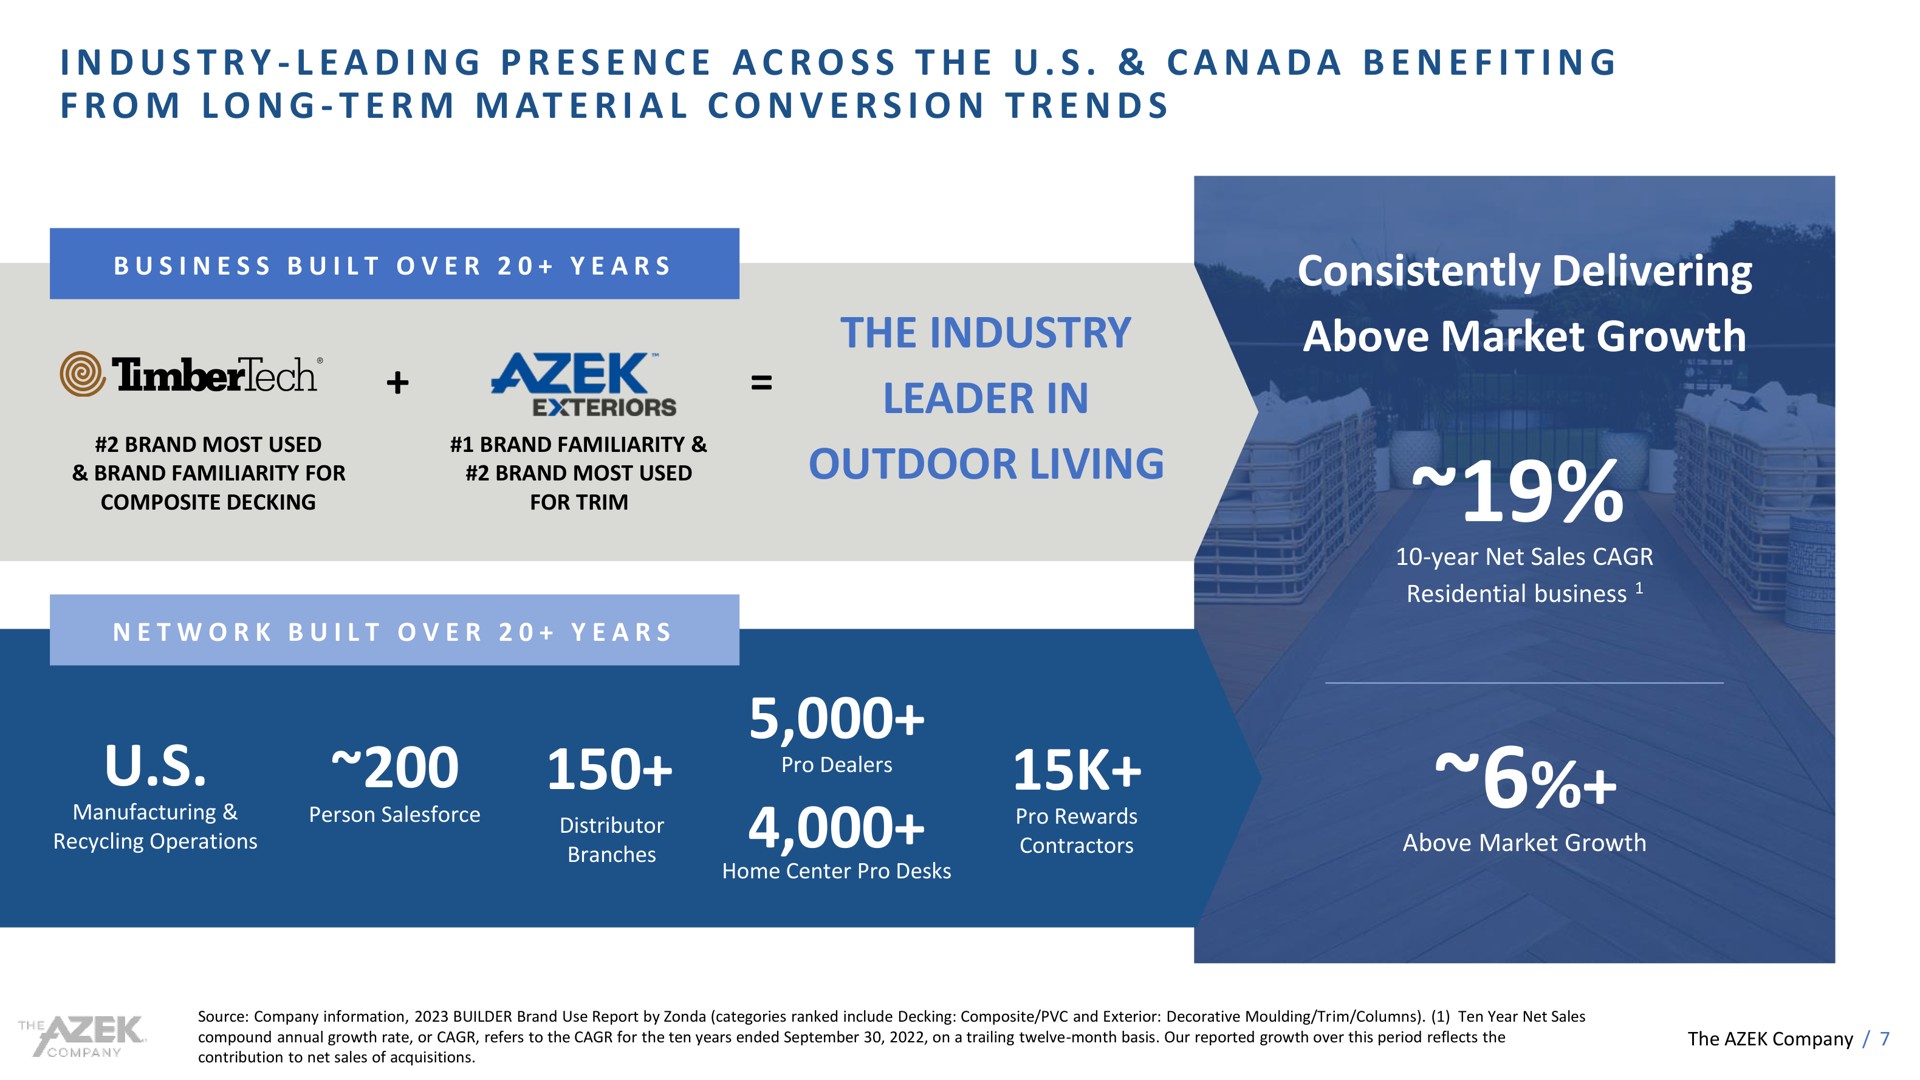 i a i a a a a i i at i a i the industry leader in outdoor living consistently delivering above market growth industry leading presence across canada benefiting from long term material conversion trends pro dealers | Azek